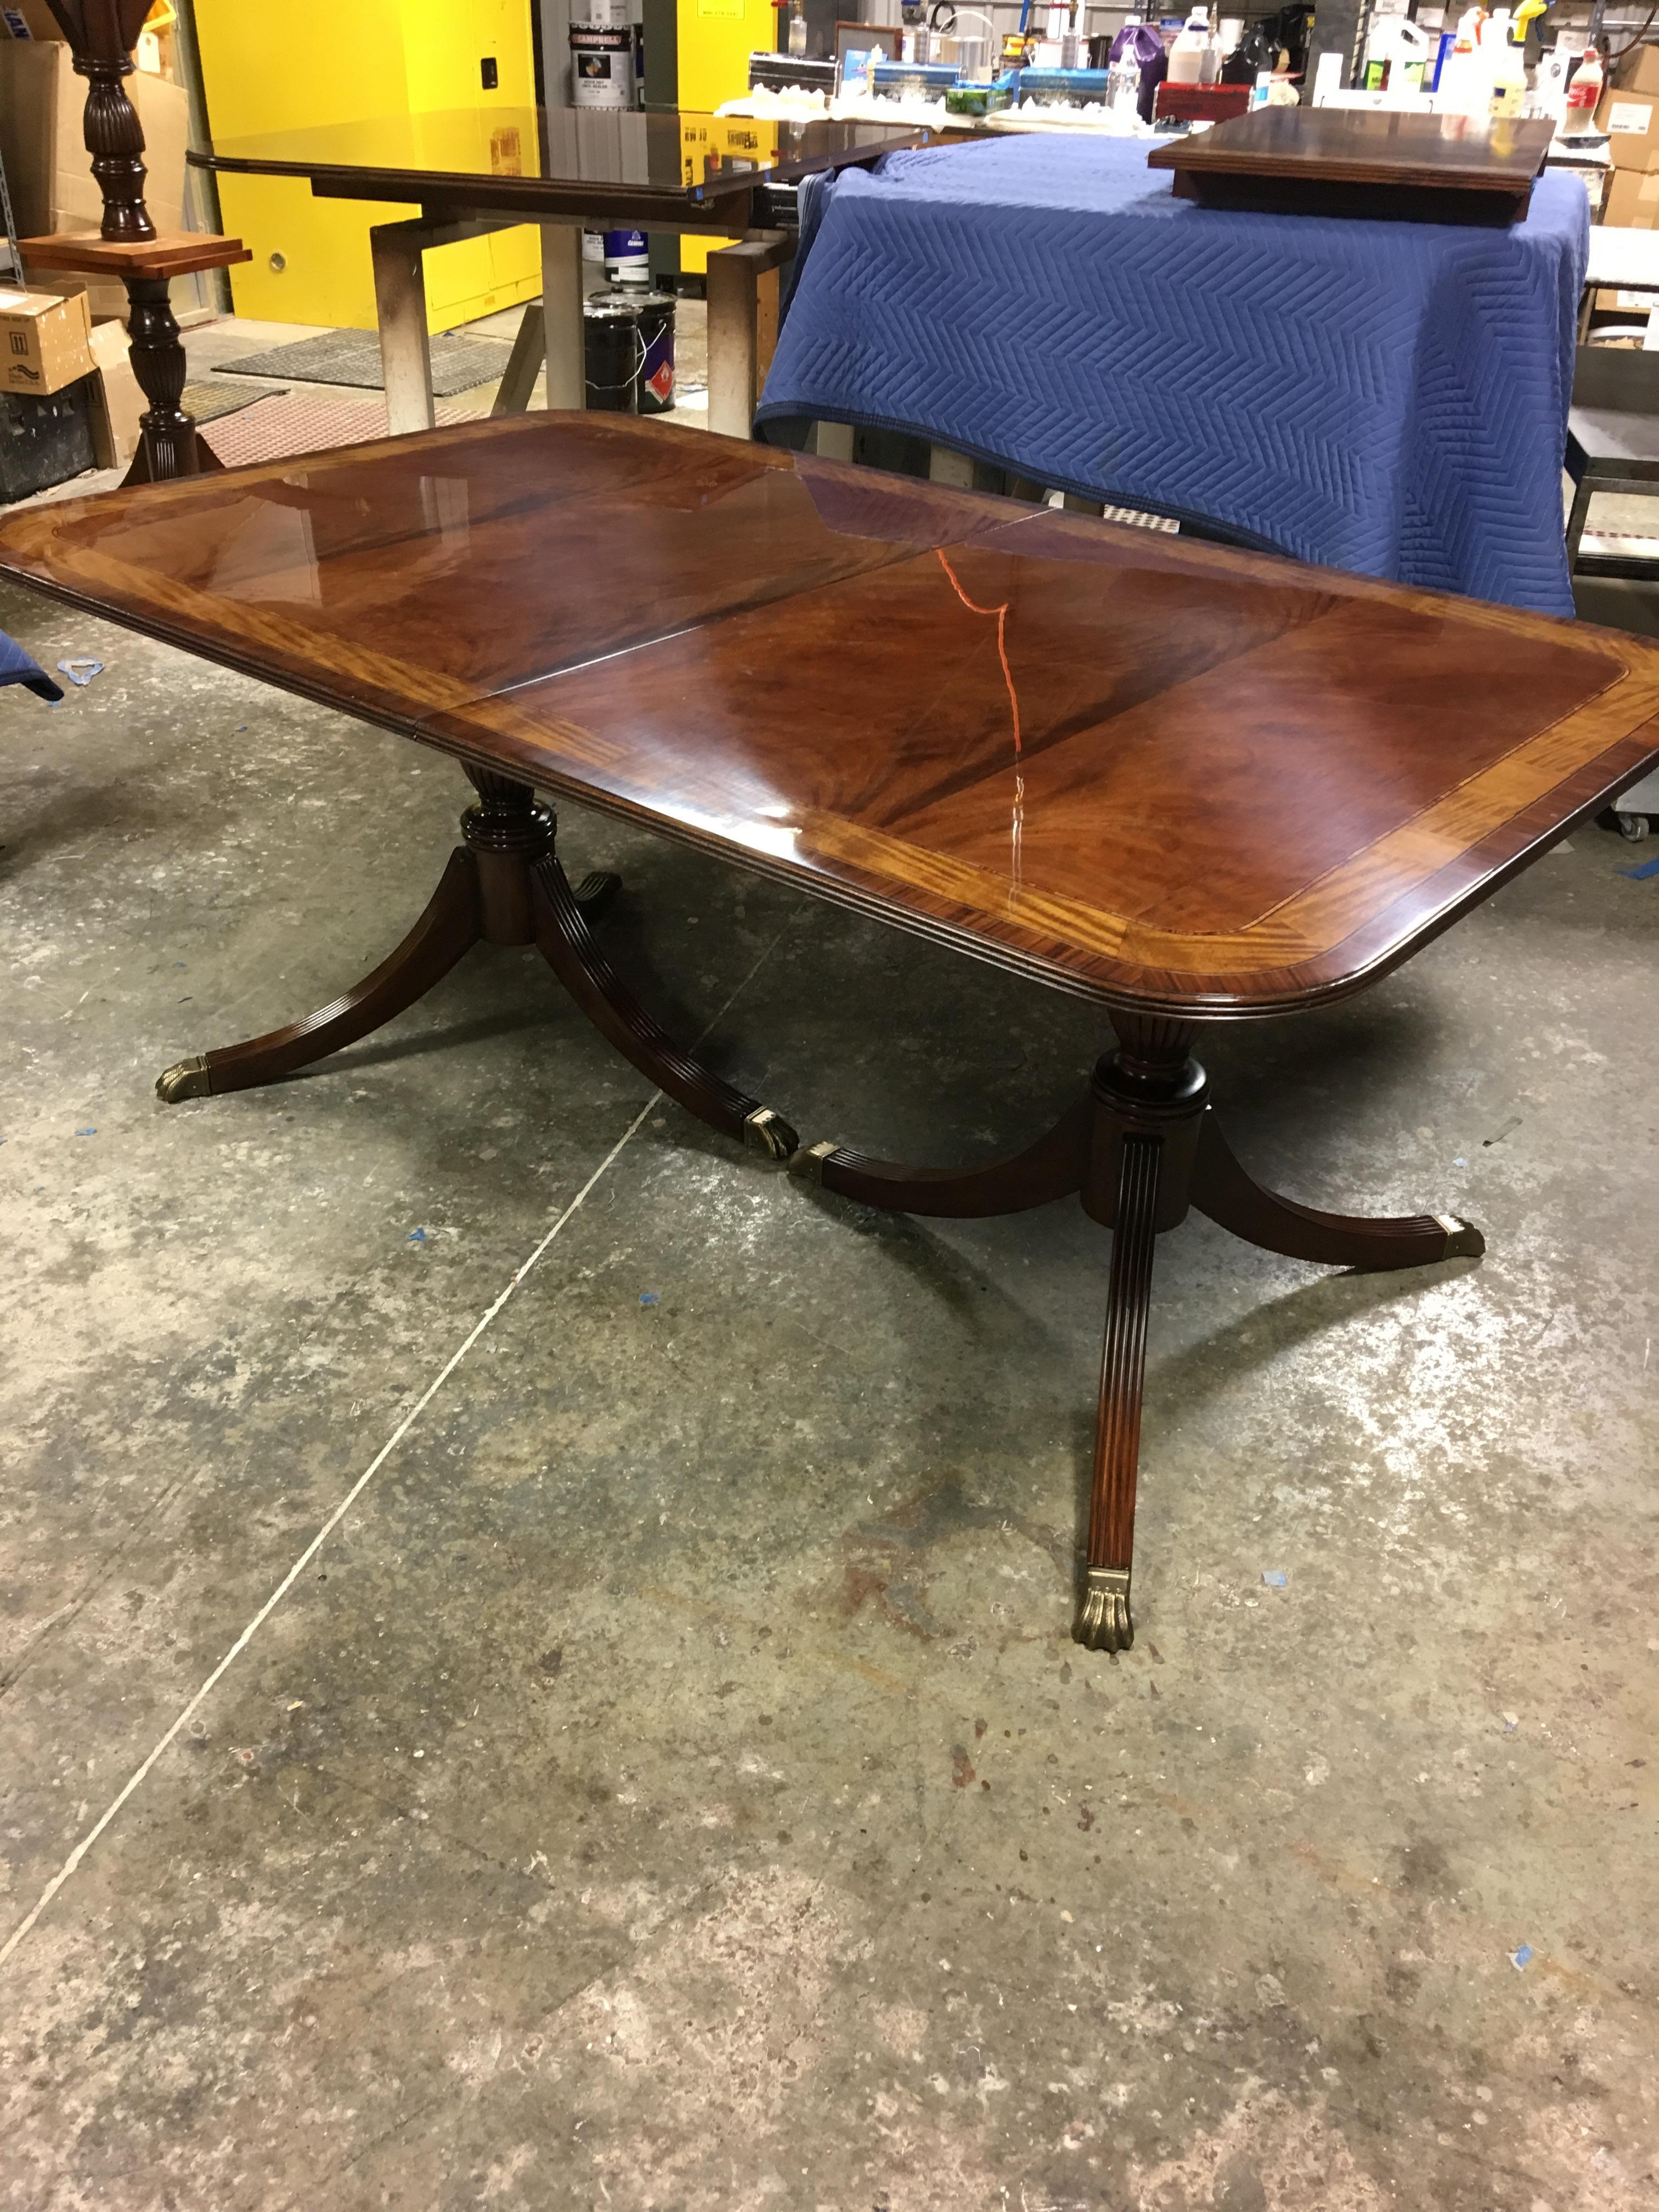 This is a made-to-order Large Traditional mahogany banquet/dining table made in the Leighton Hall shop. It features a field of slip-matched swirly crotch mahogany from west Africa and movingue and santos rosewood borders from South America. The